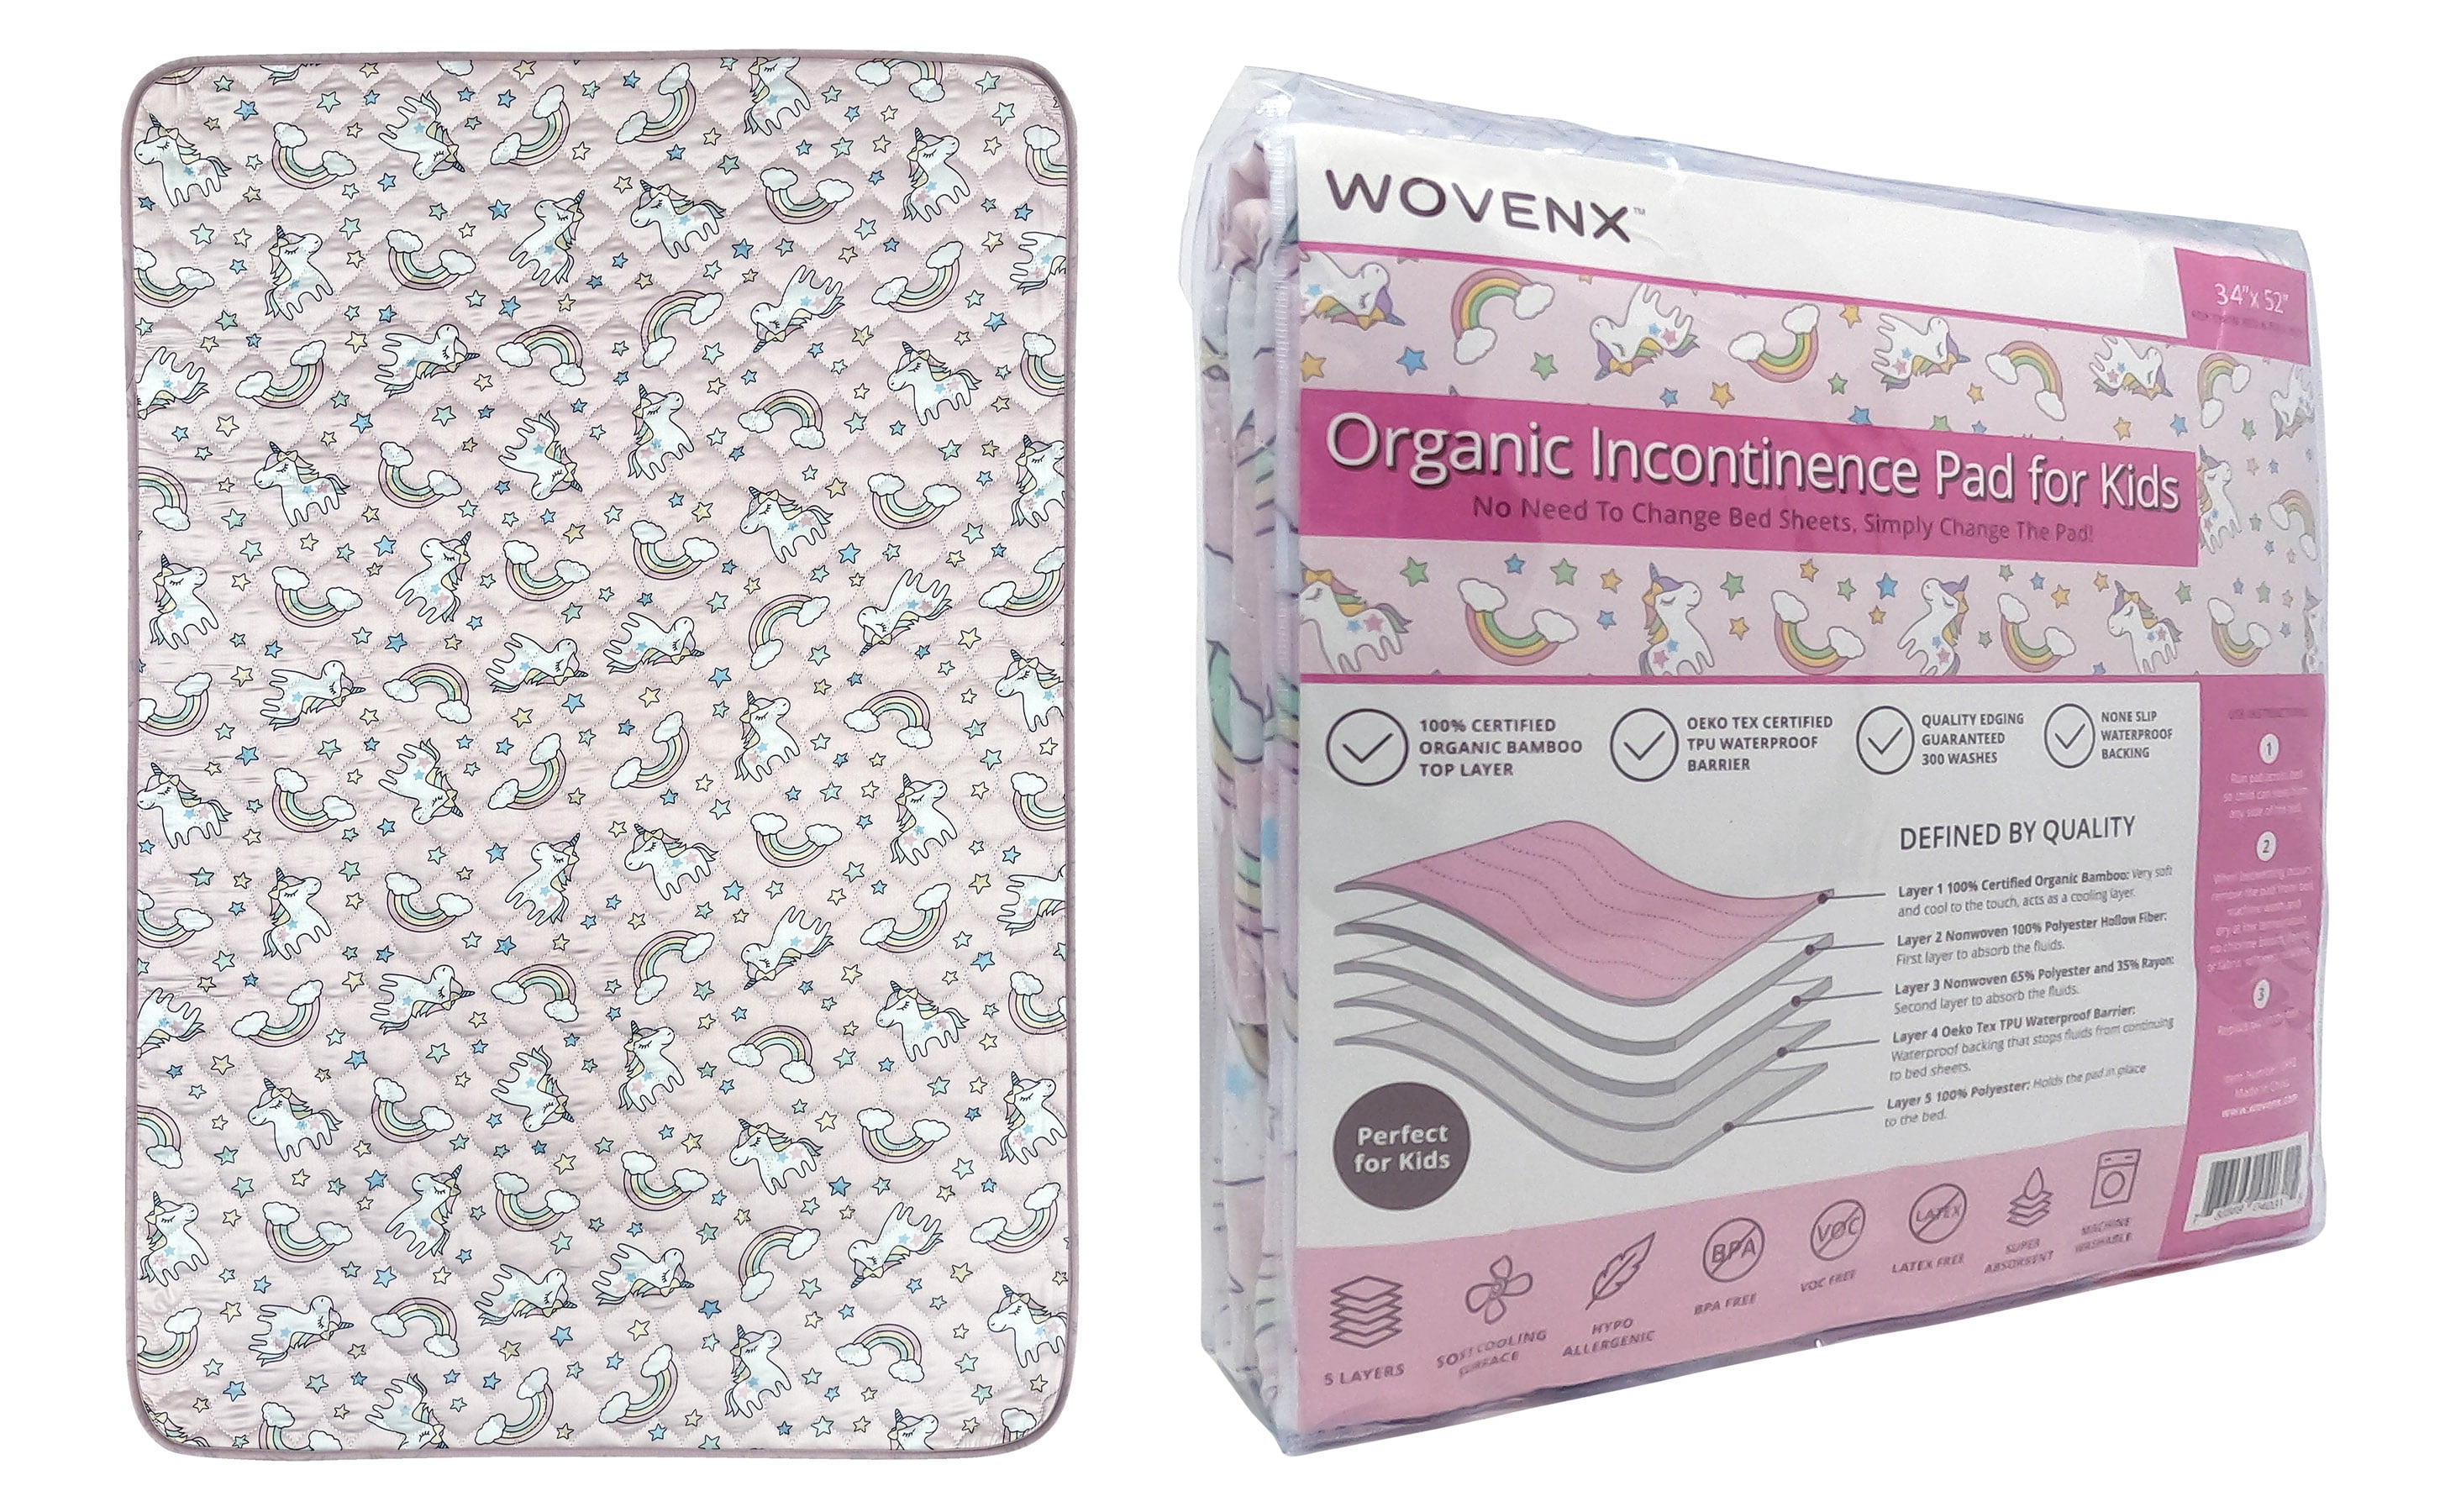 Wovenx Organic Incontinence Pads For